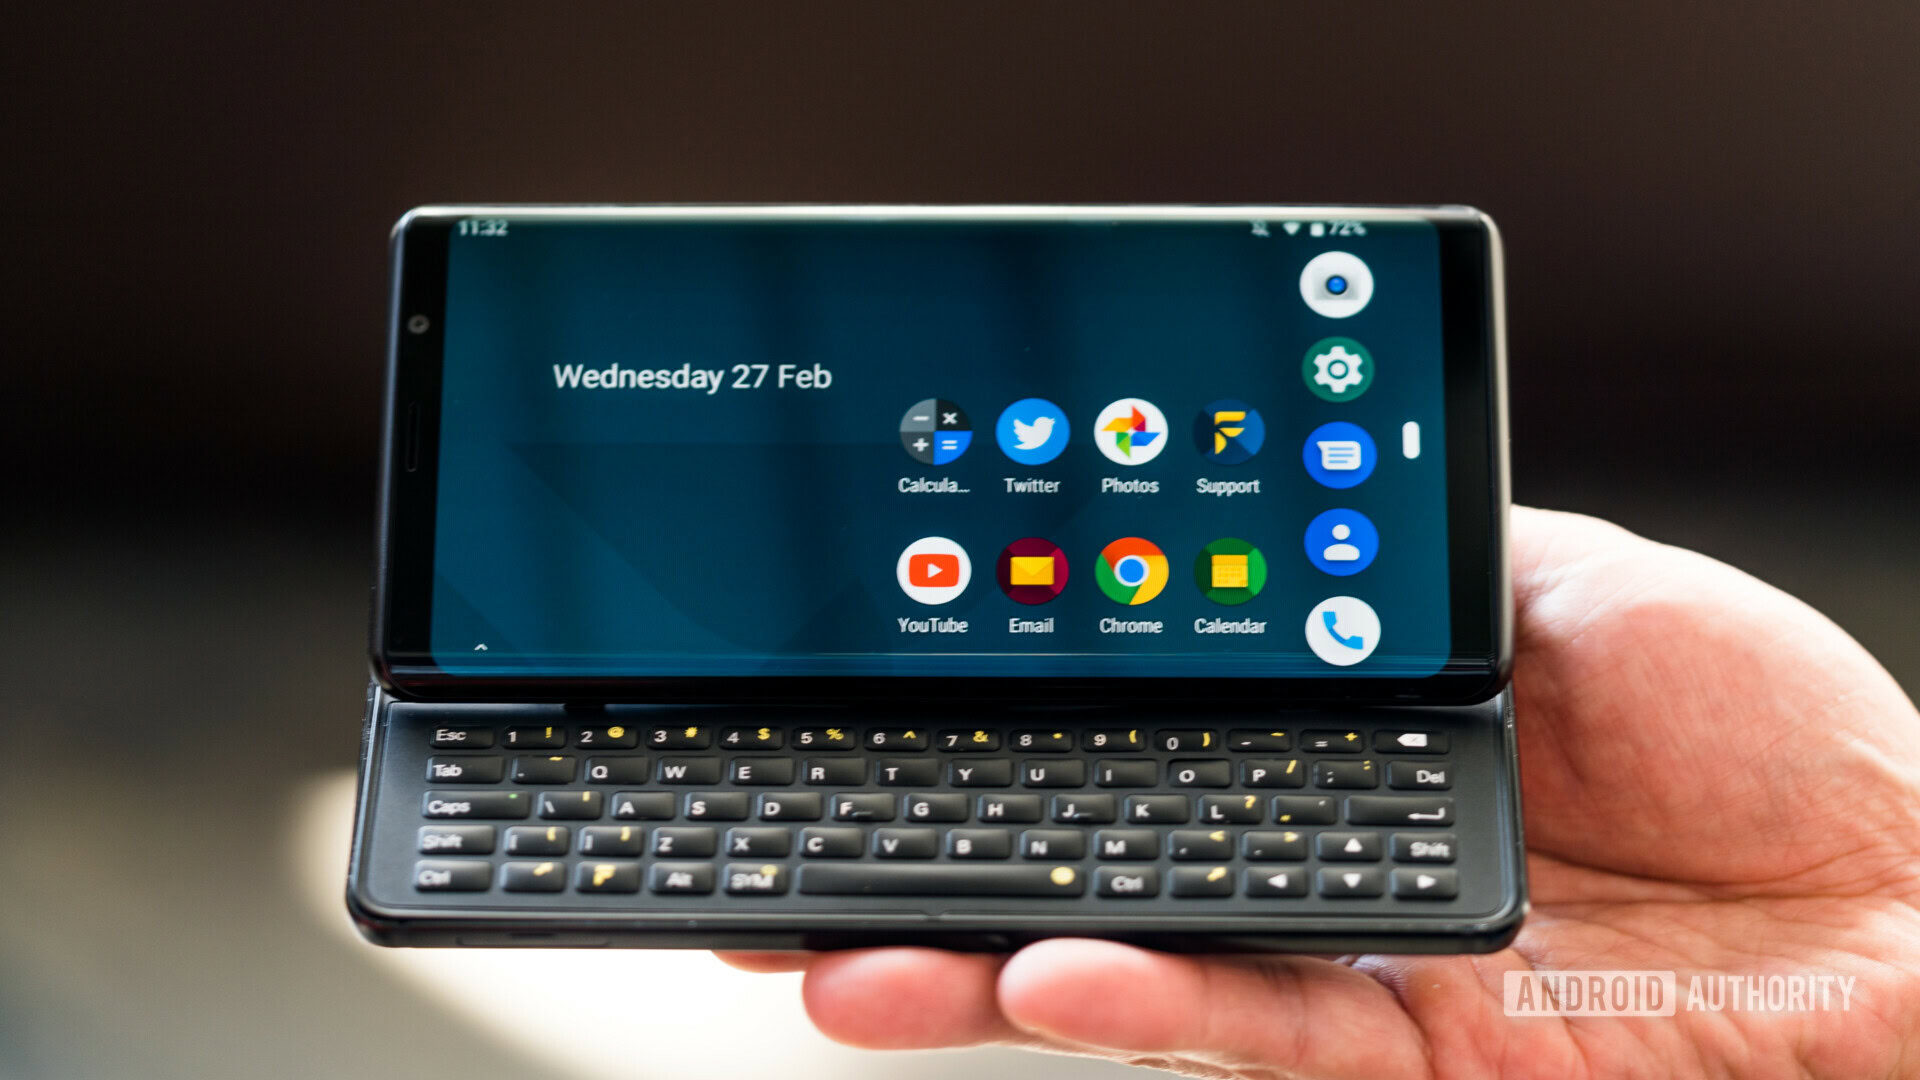 Droid Phone With Keyboard